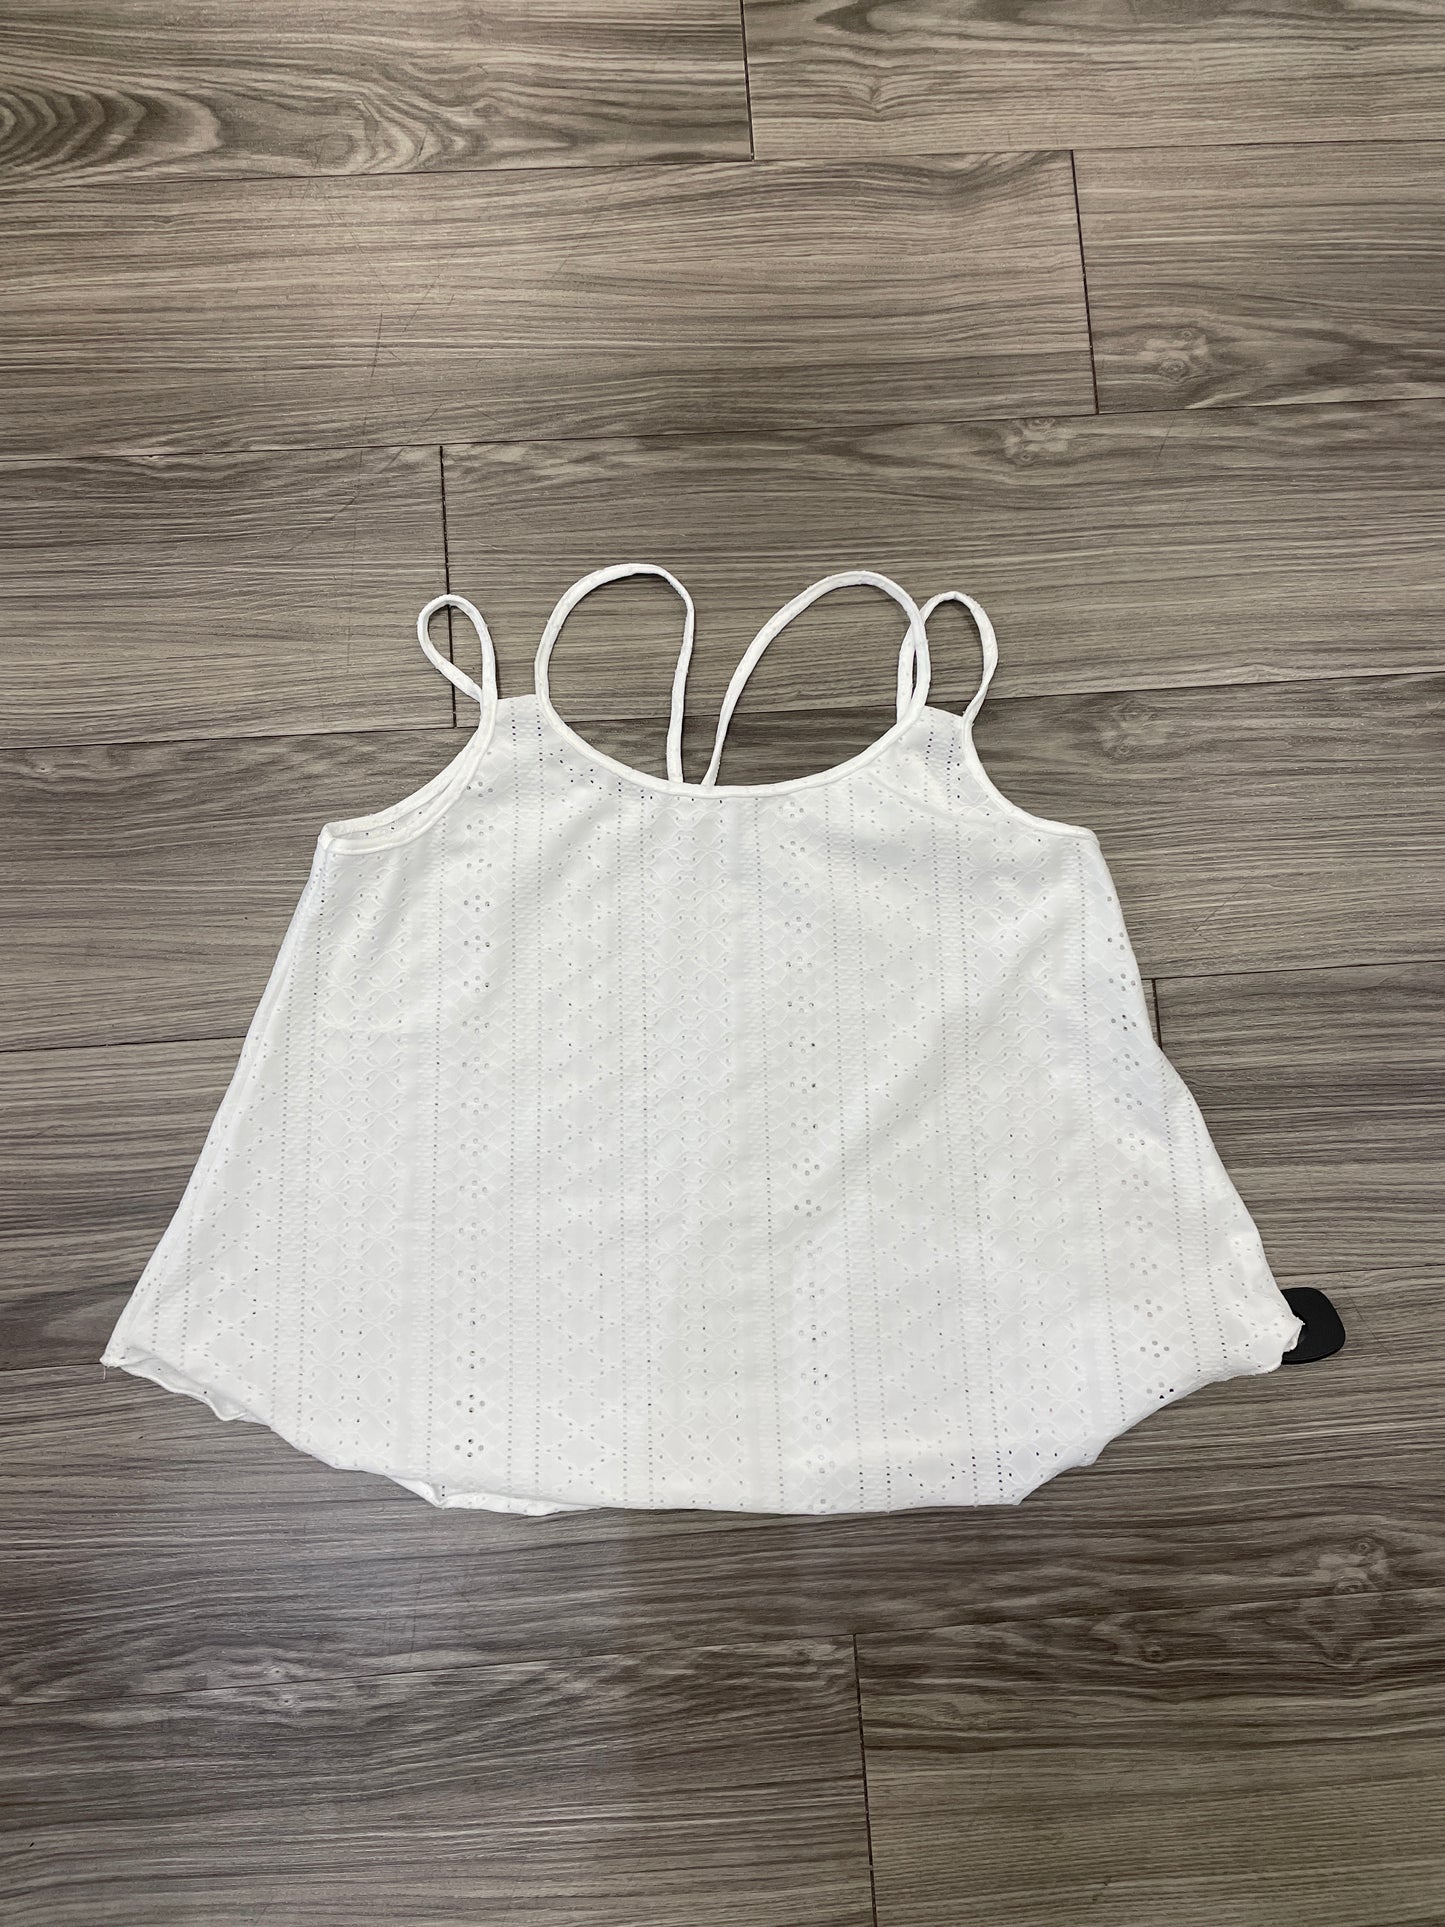 White Tank Top Clothes Mentor, Size M